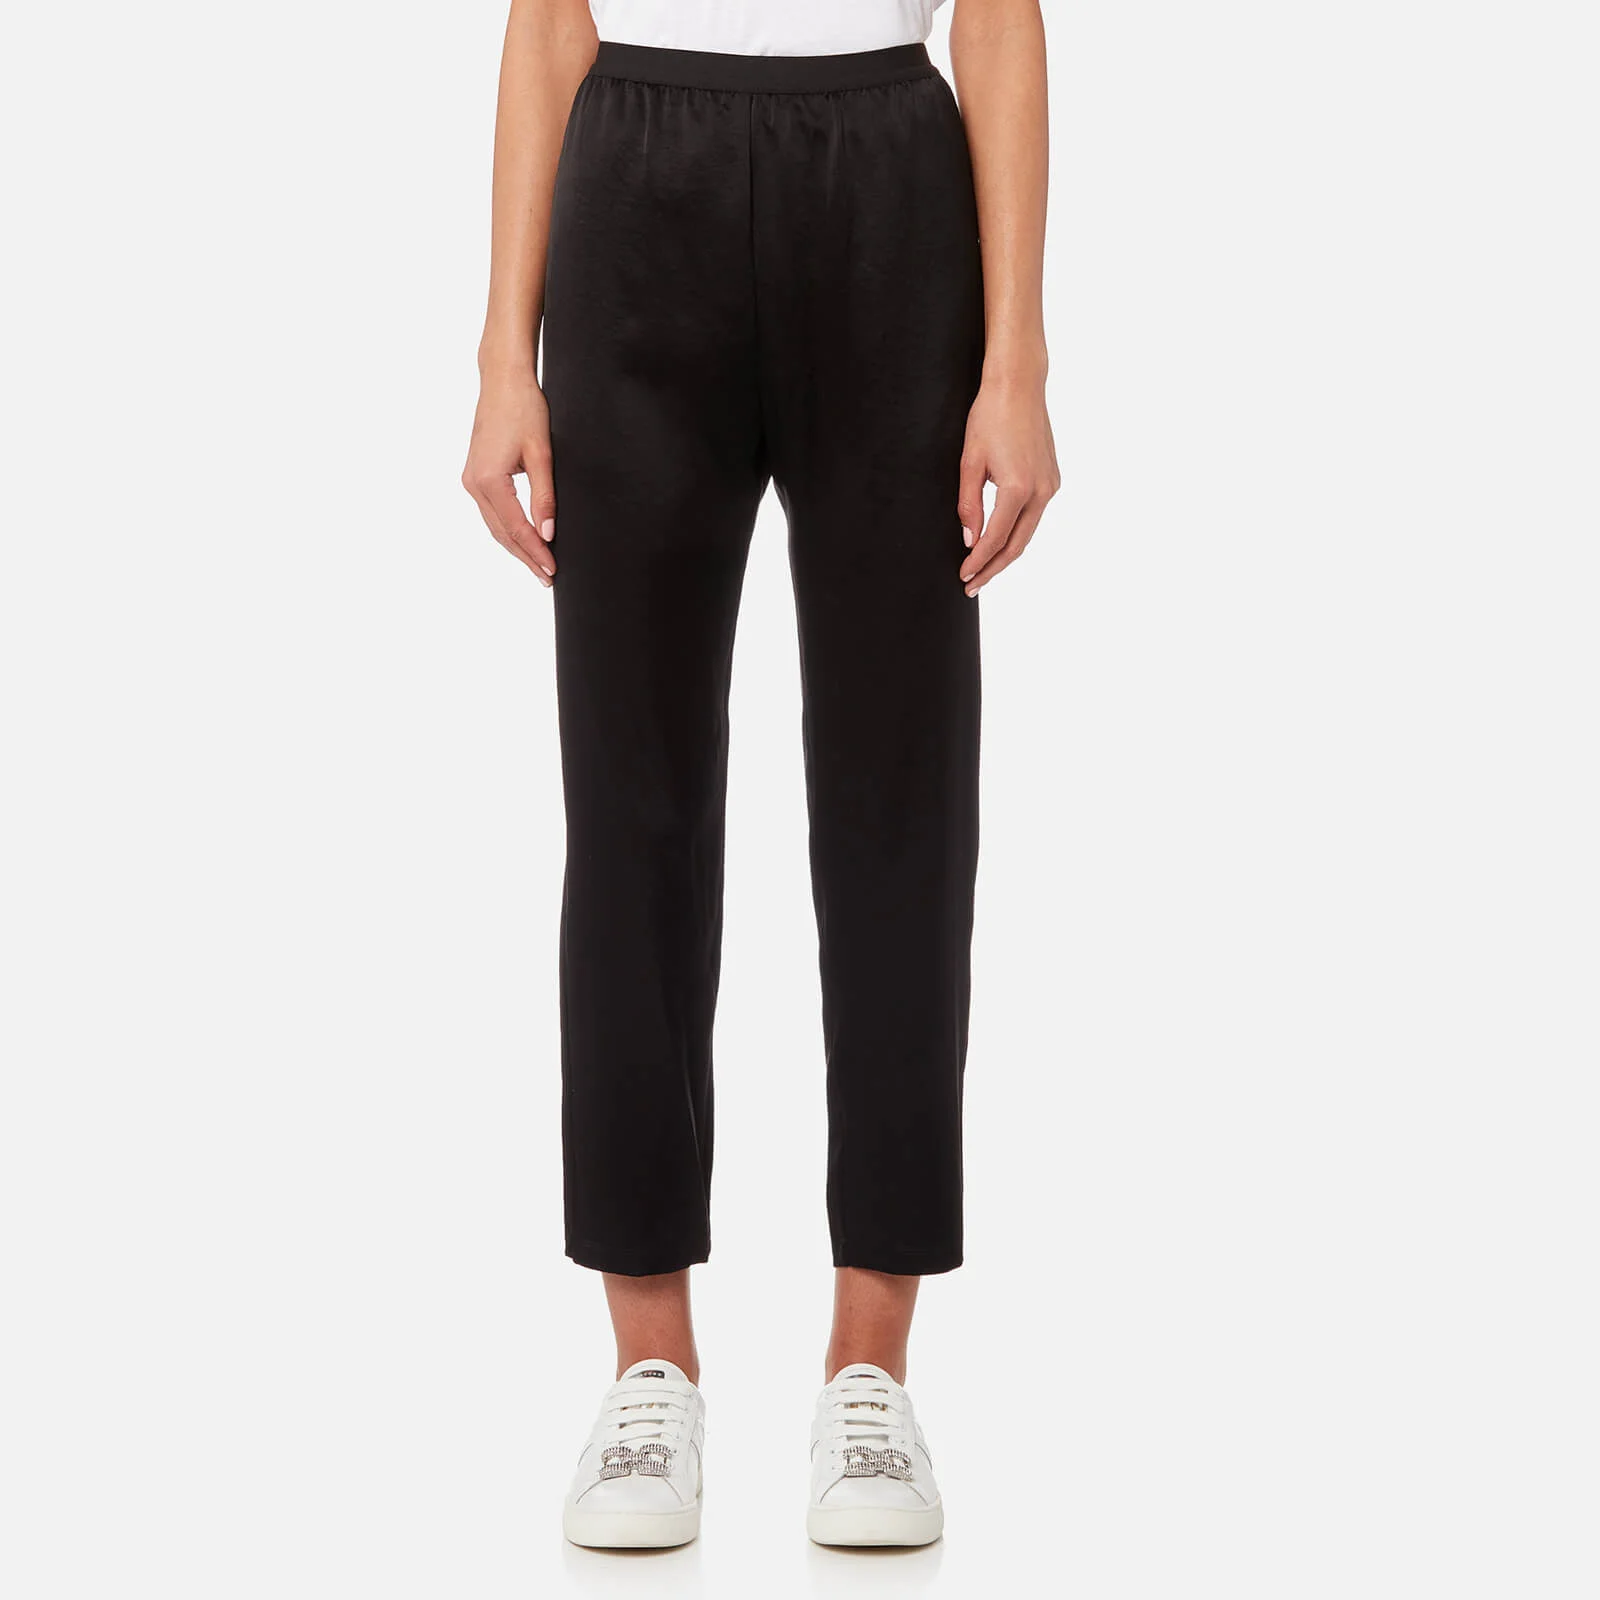 T by Alexander Wang Women's Wash & Go Woven Pants with Elasticated Waist - Black Image 1